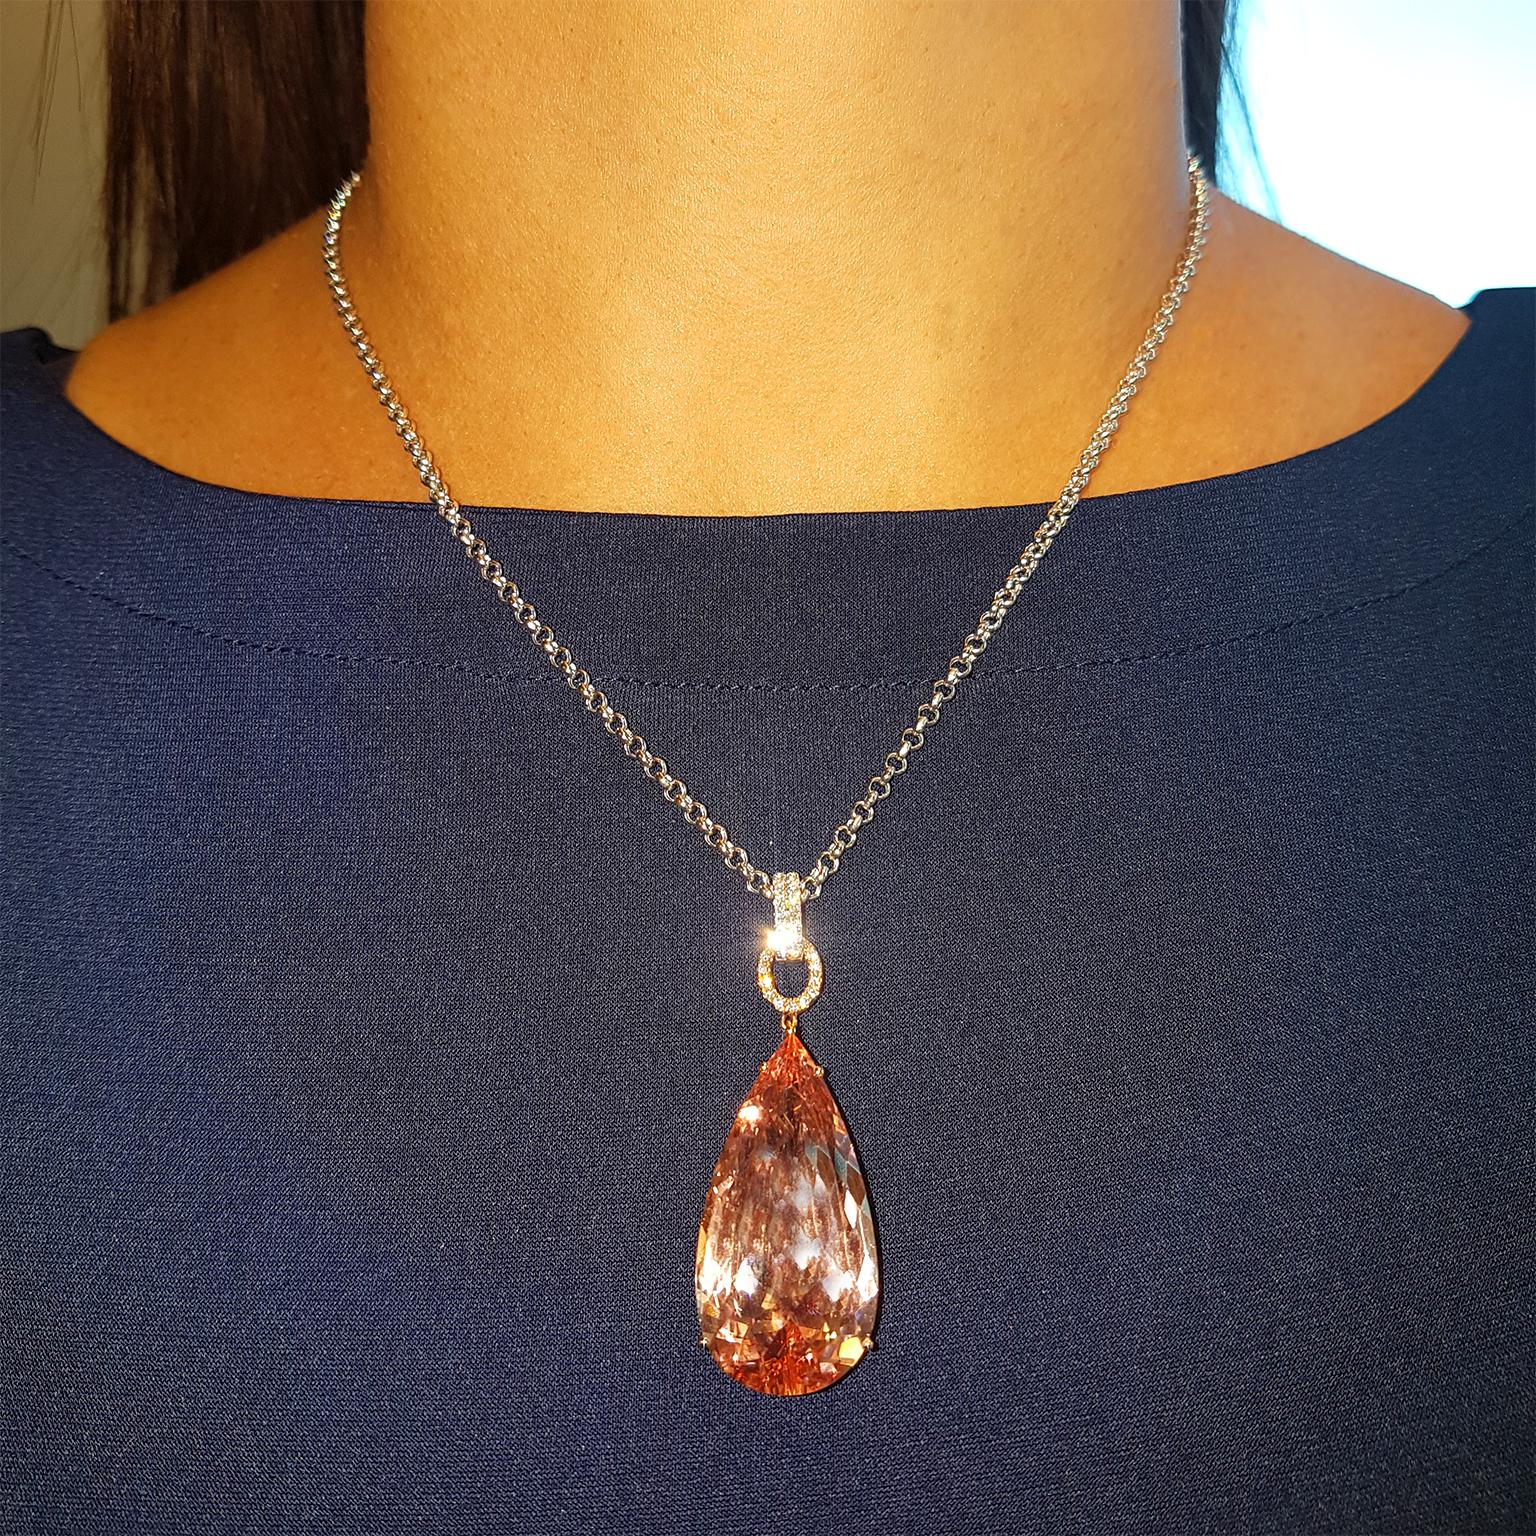 MAGNIFICENT MORGANITE! This gorgeous cocktail pendant has been crafted in 18ct White & Rose Gold and set with glittering fine white diamonds & rich 33.59ct peach-pink Brazilian Morganite. One-off & Exclusive! 18ct 18 inch chain included.